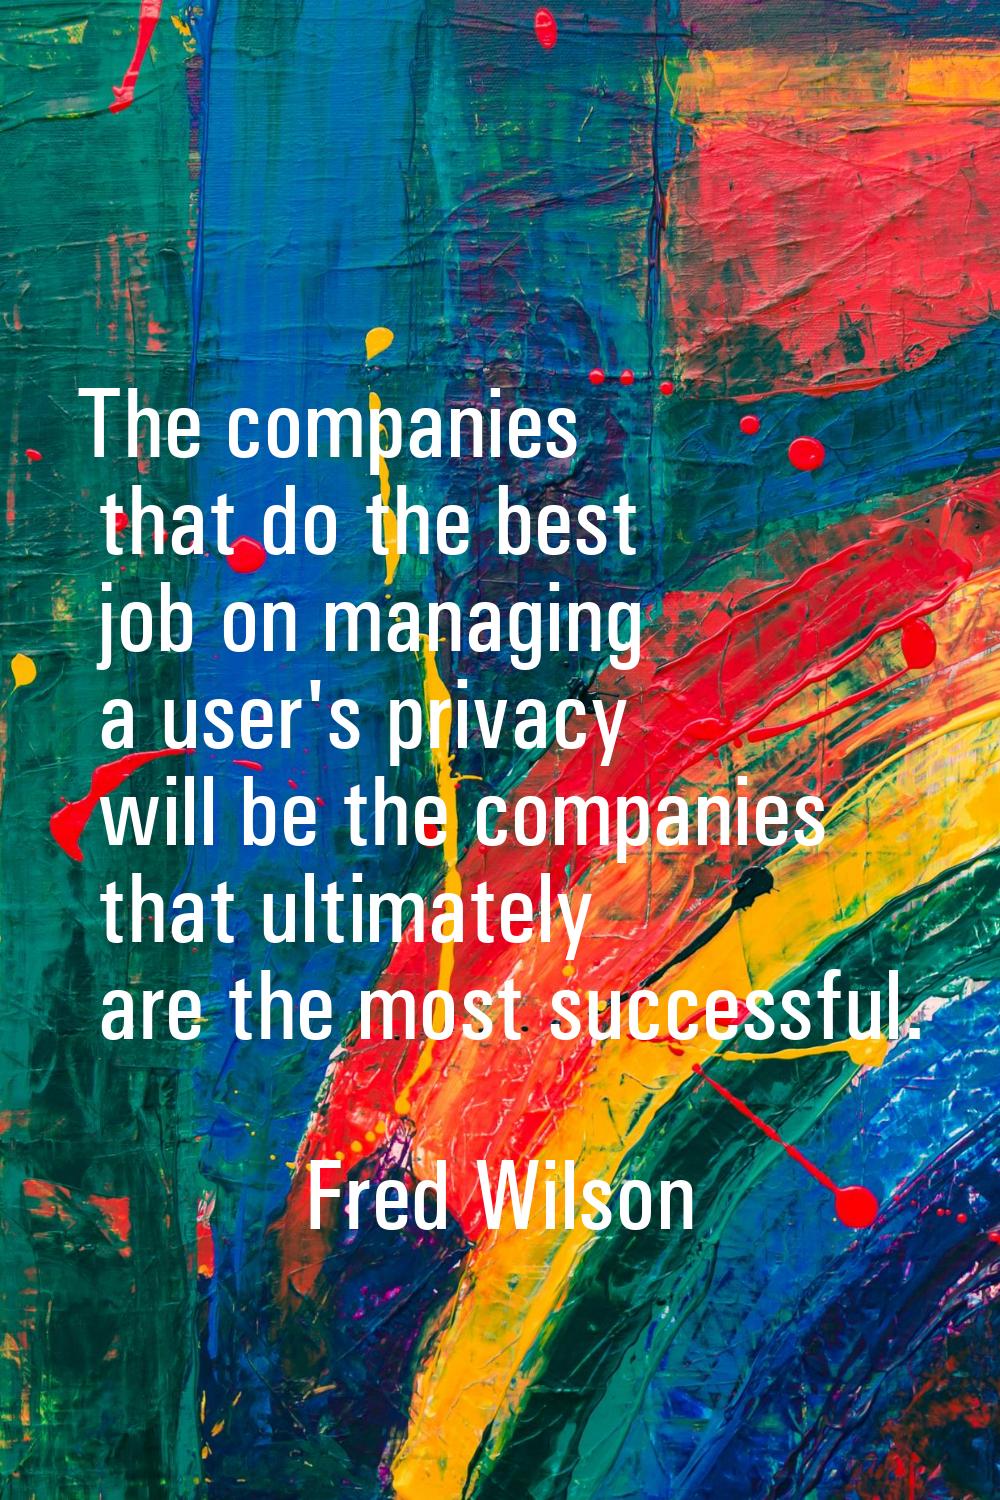 The companies that do the best job on managing a user's privacy will be the companies that ultimate